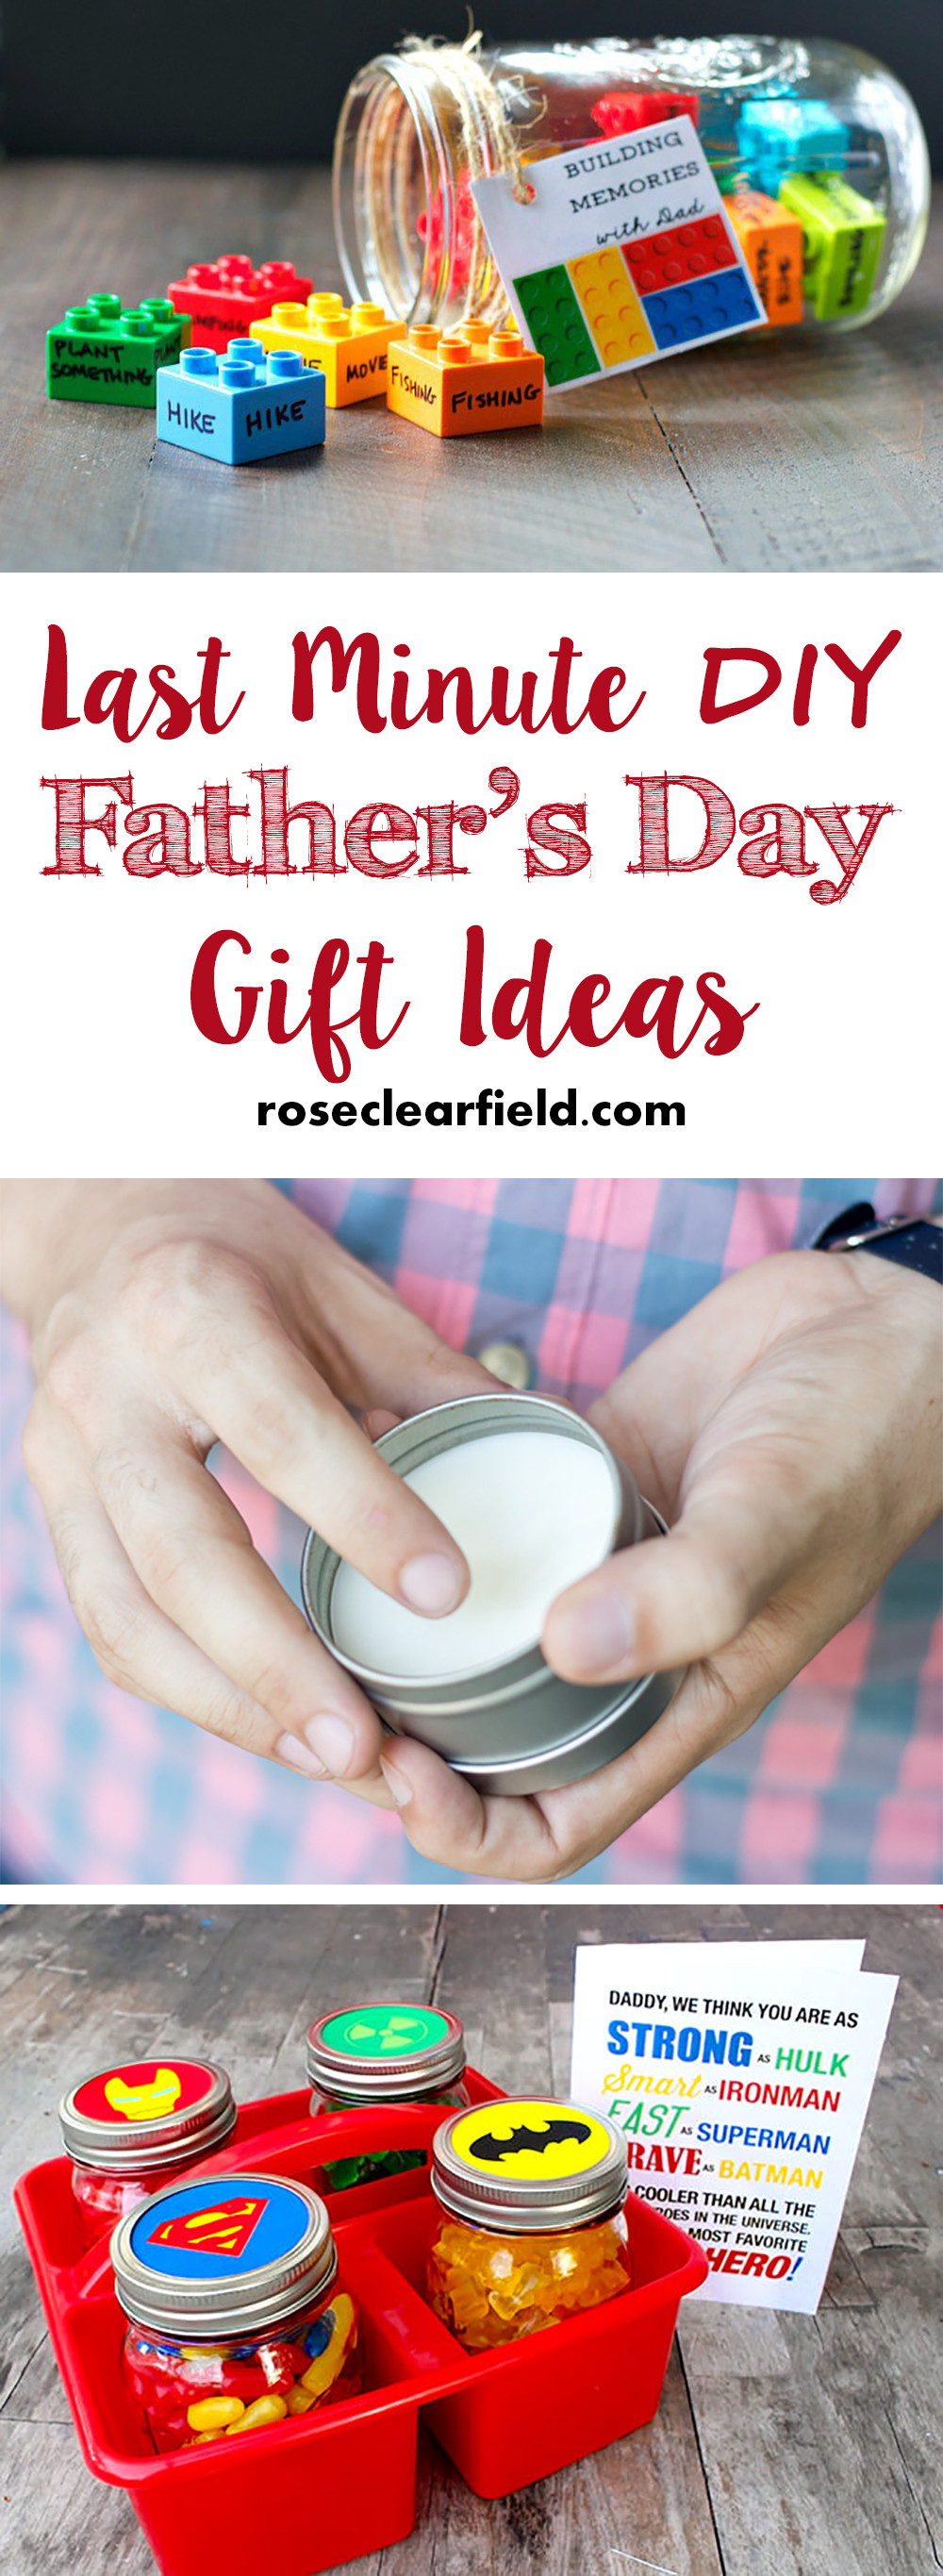 Mother'S Day Diy Gift Ideas
 Last Minute DIY Father s Day Gift Ideas • Rose Clearfield